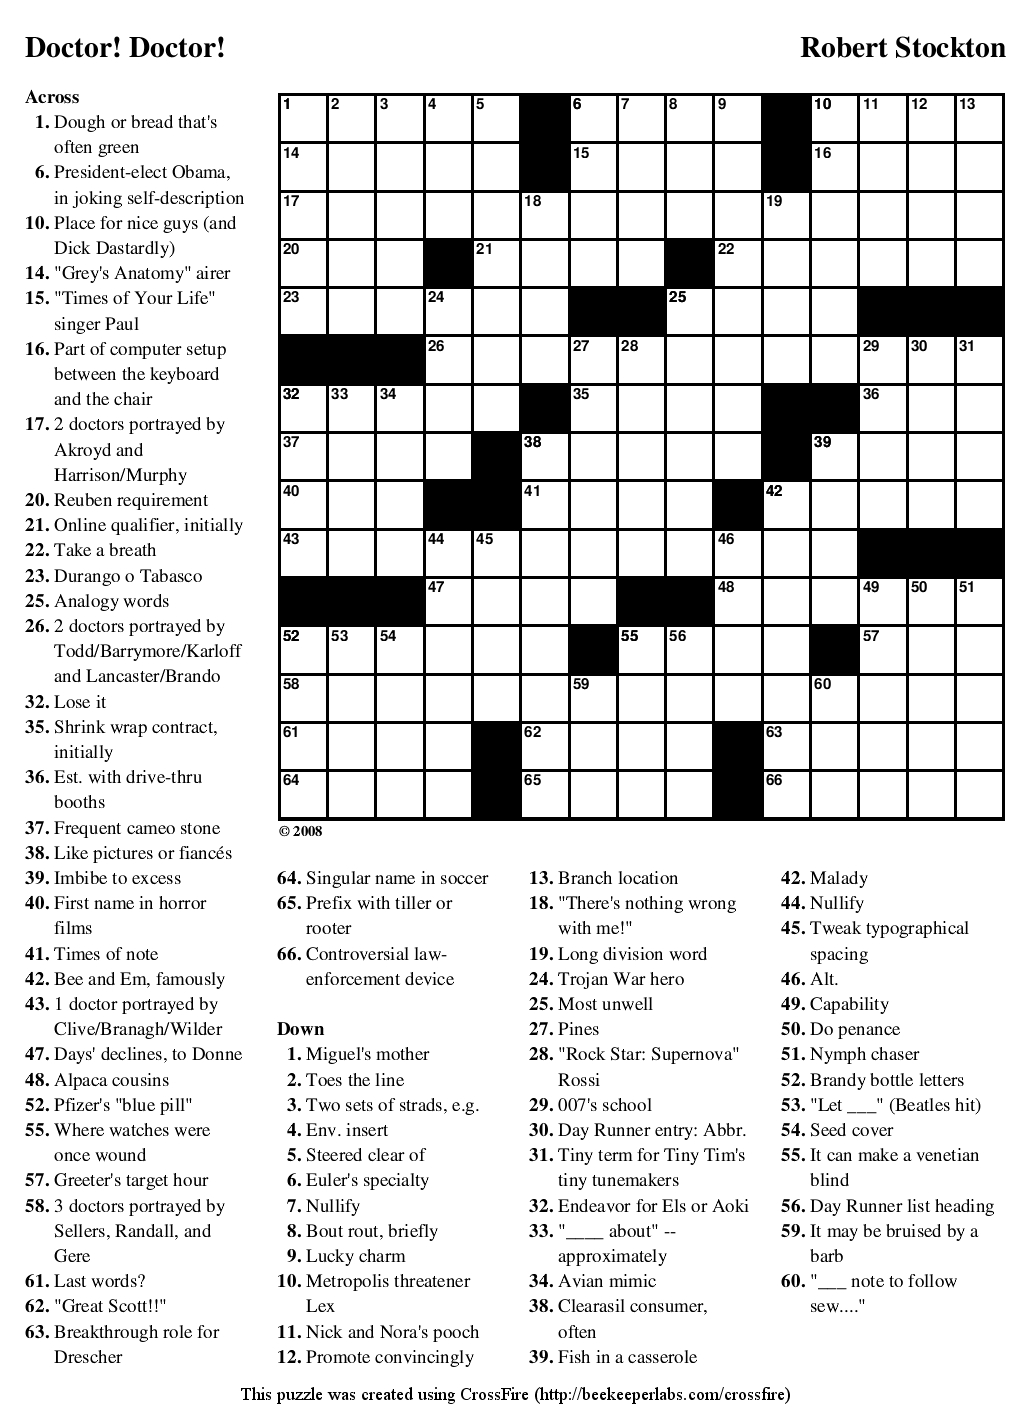 Crossword Puzzles Printable - Yahoo Image Search Results | Crossword - Make Your Own Crossword Puzzle Free Printable With Answer Key